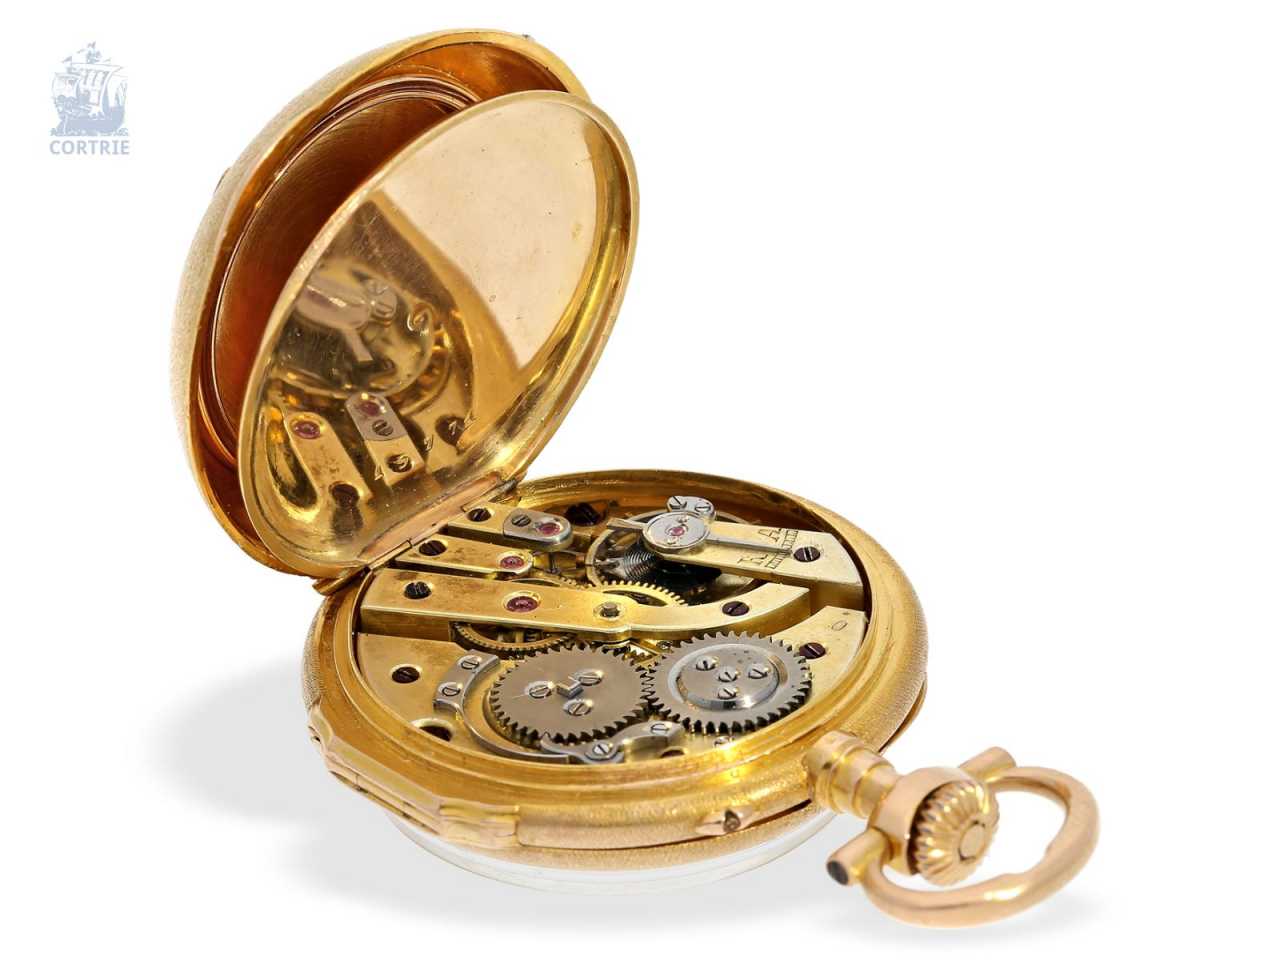 Auction: Pocket watch/Anhängeuhr: very rare and extraordinary watch in the Louis XVI style ...